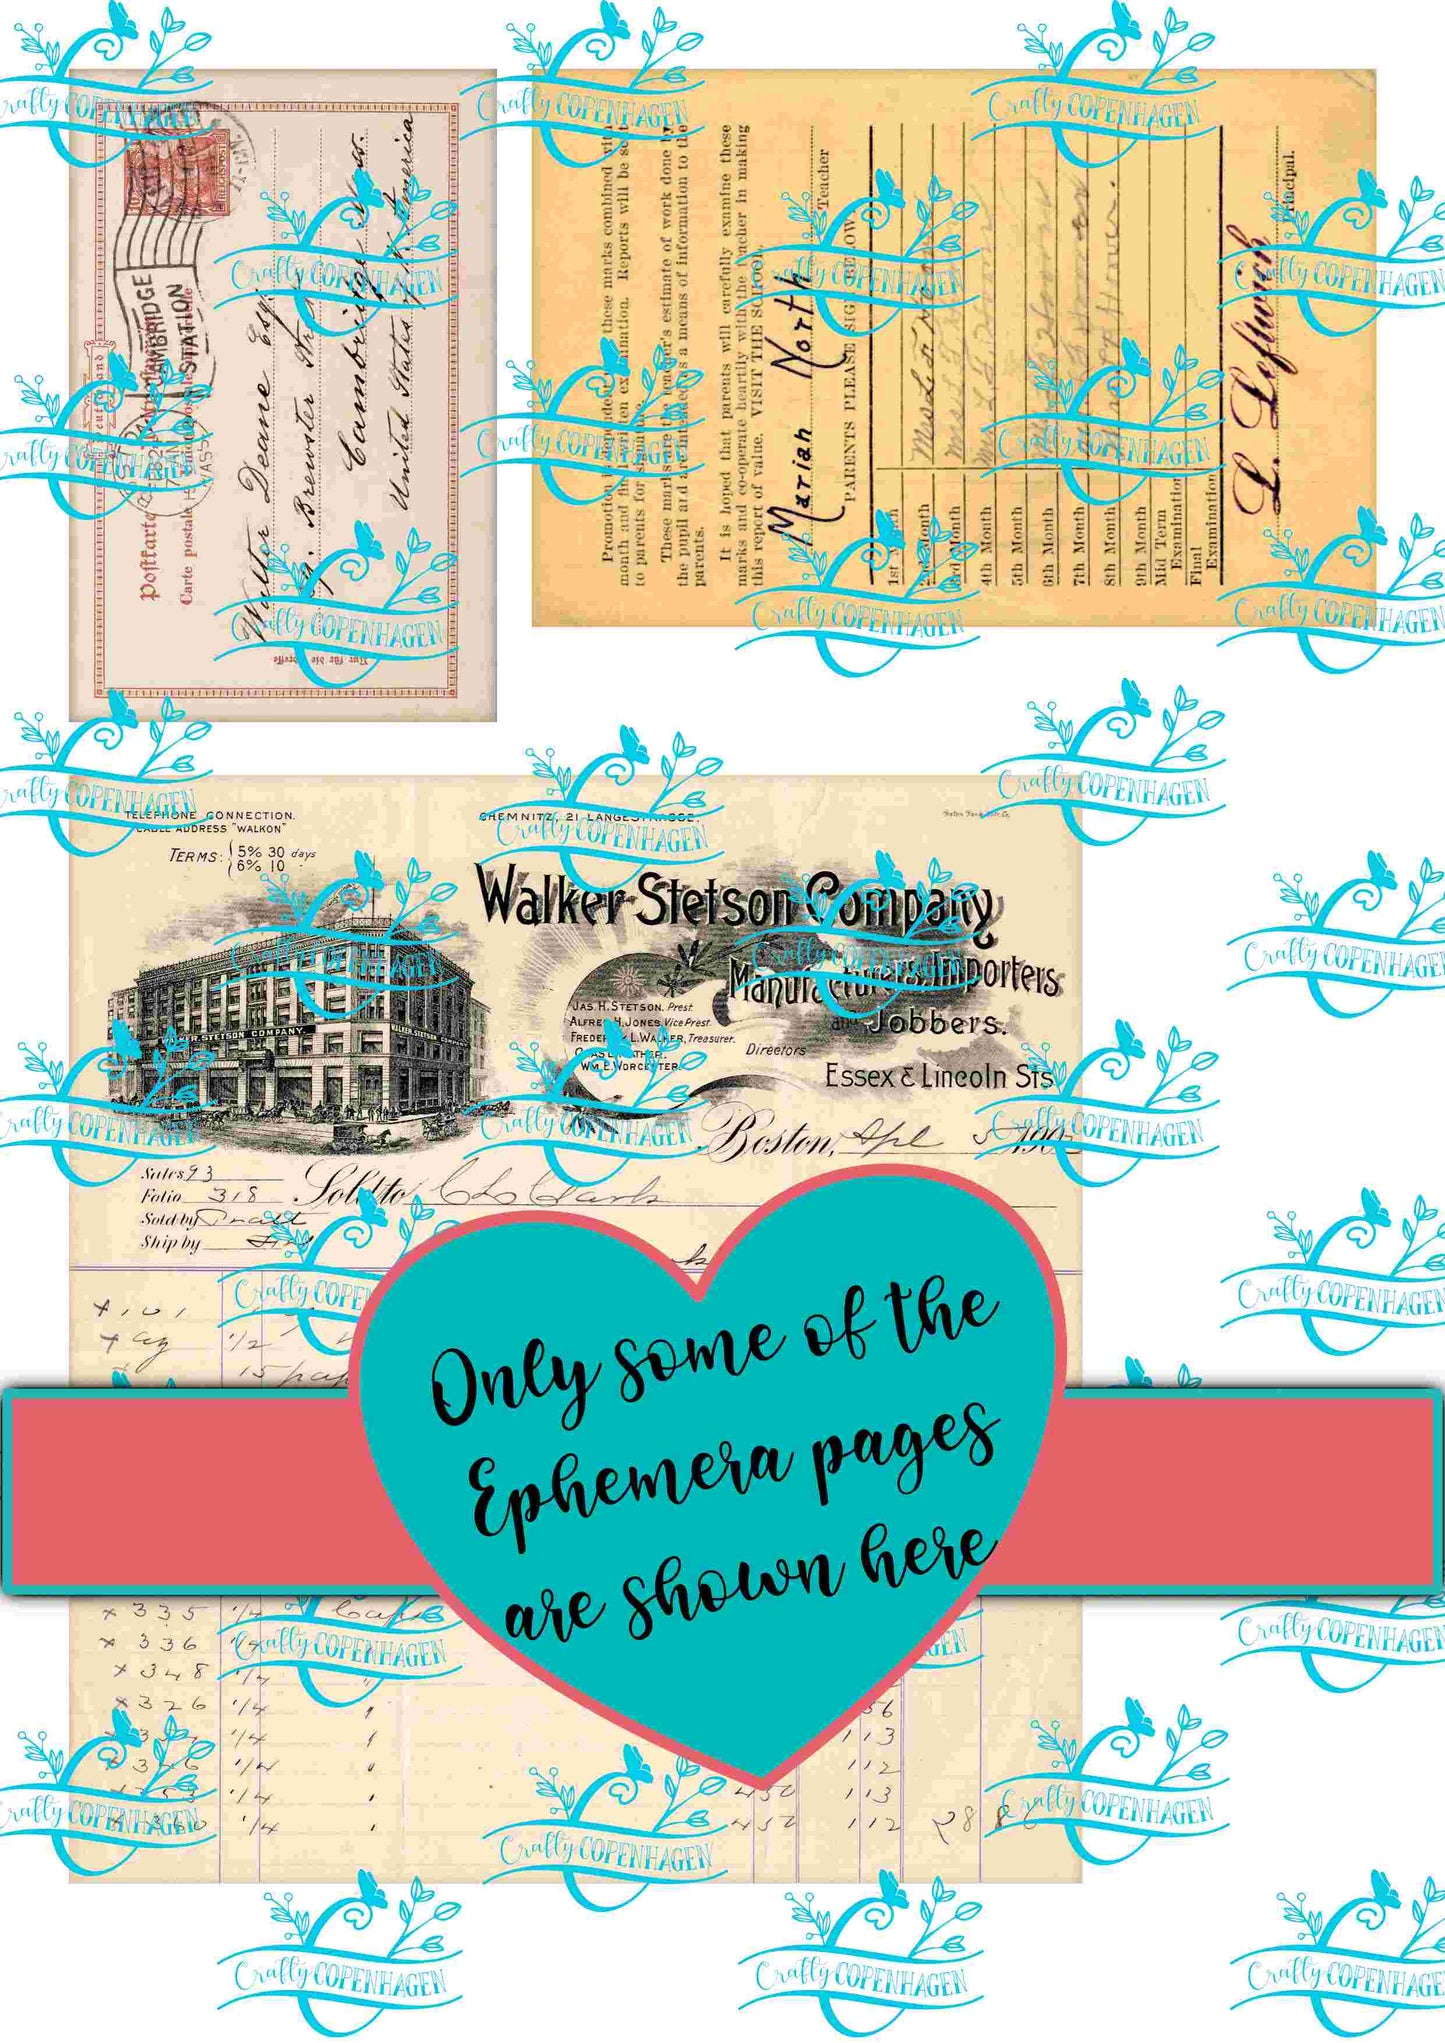 Antique Documents Ephemera Kit 1 - 43 Vintage Ephemera on 20 Pages, Instant Download & Print, 1700s, 1800s, early 1900s, handwritten letters